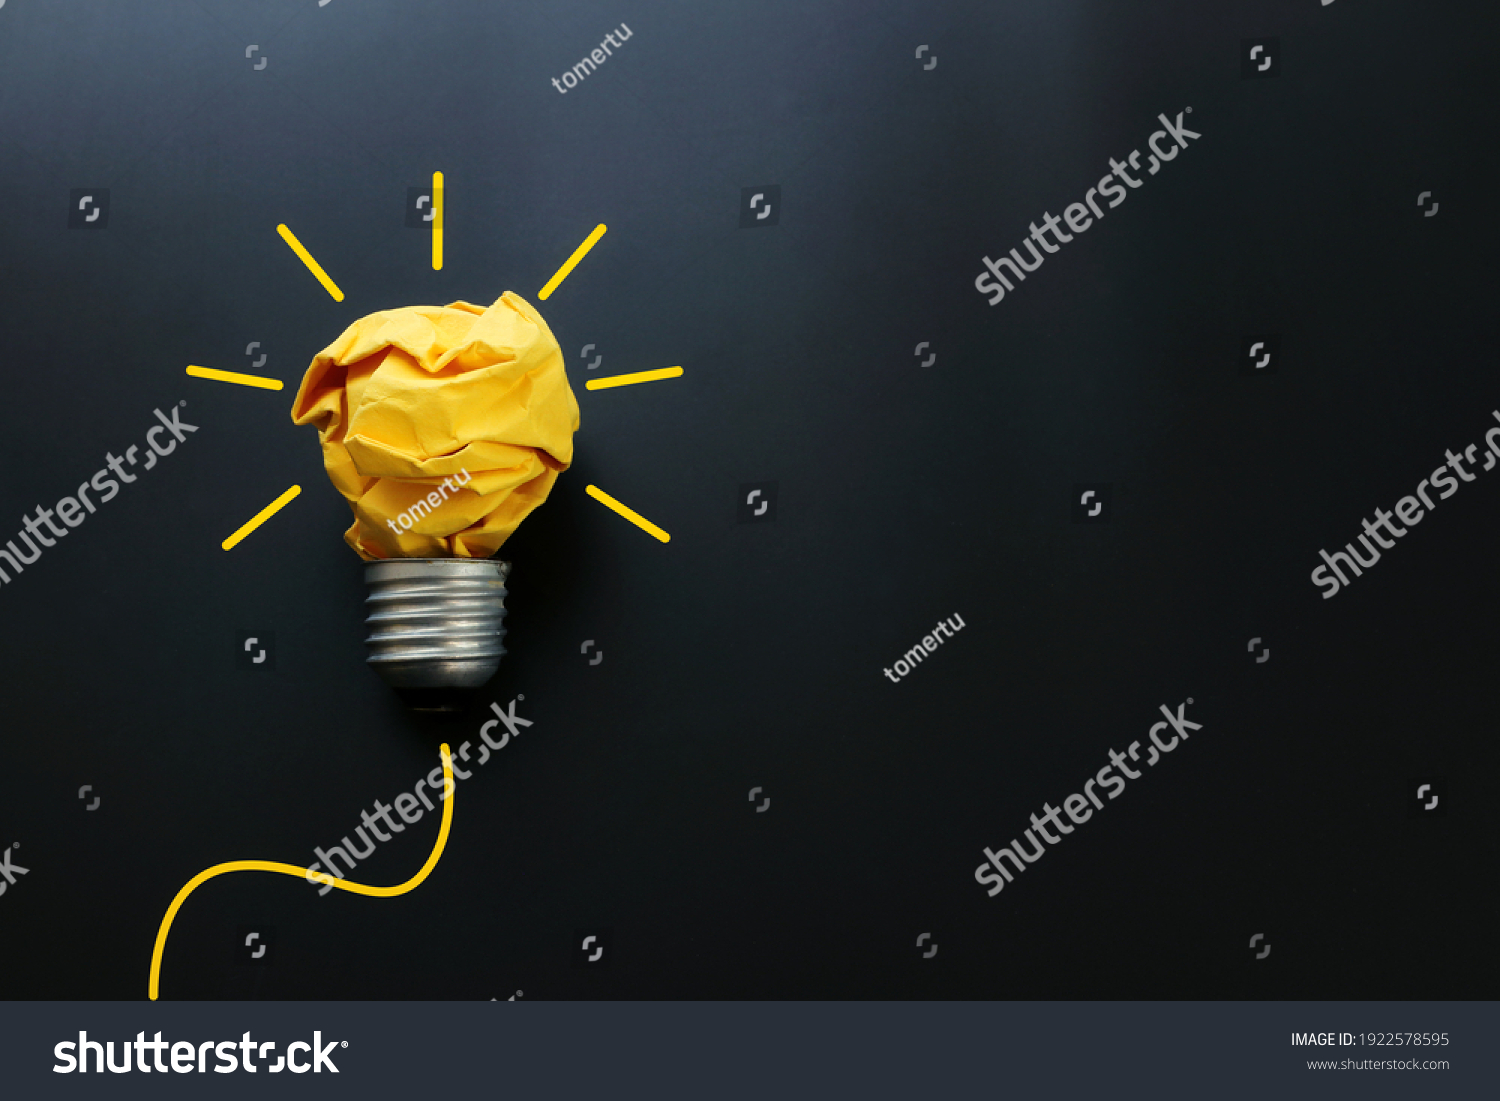 Education concept image. Creative idea and innovation. Crumpled paper as light bulb metaphor over black background #1922578595